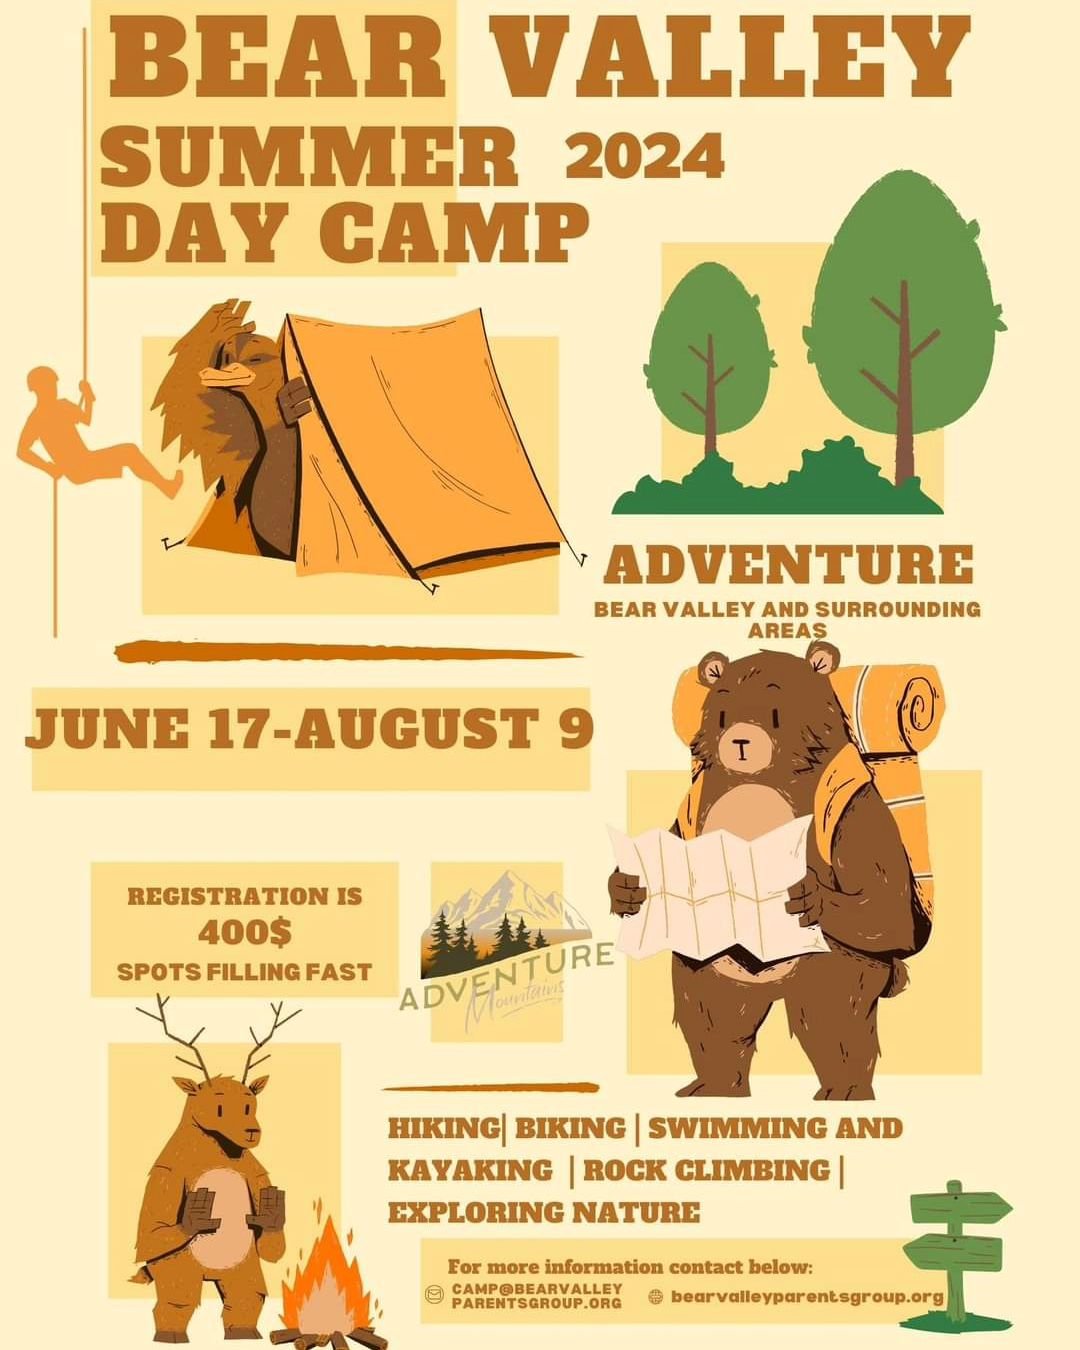 Join us for some summer fun at Bear Valley Summer Camp! ☀️ Registration for kids is now open. Don't miss out on the adventure!